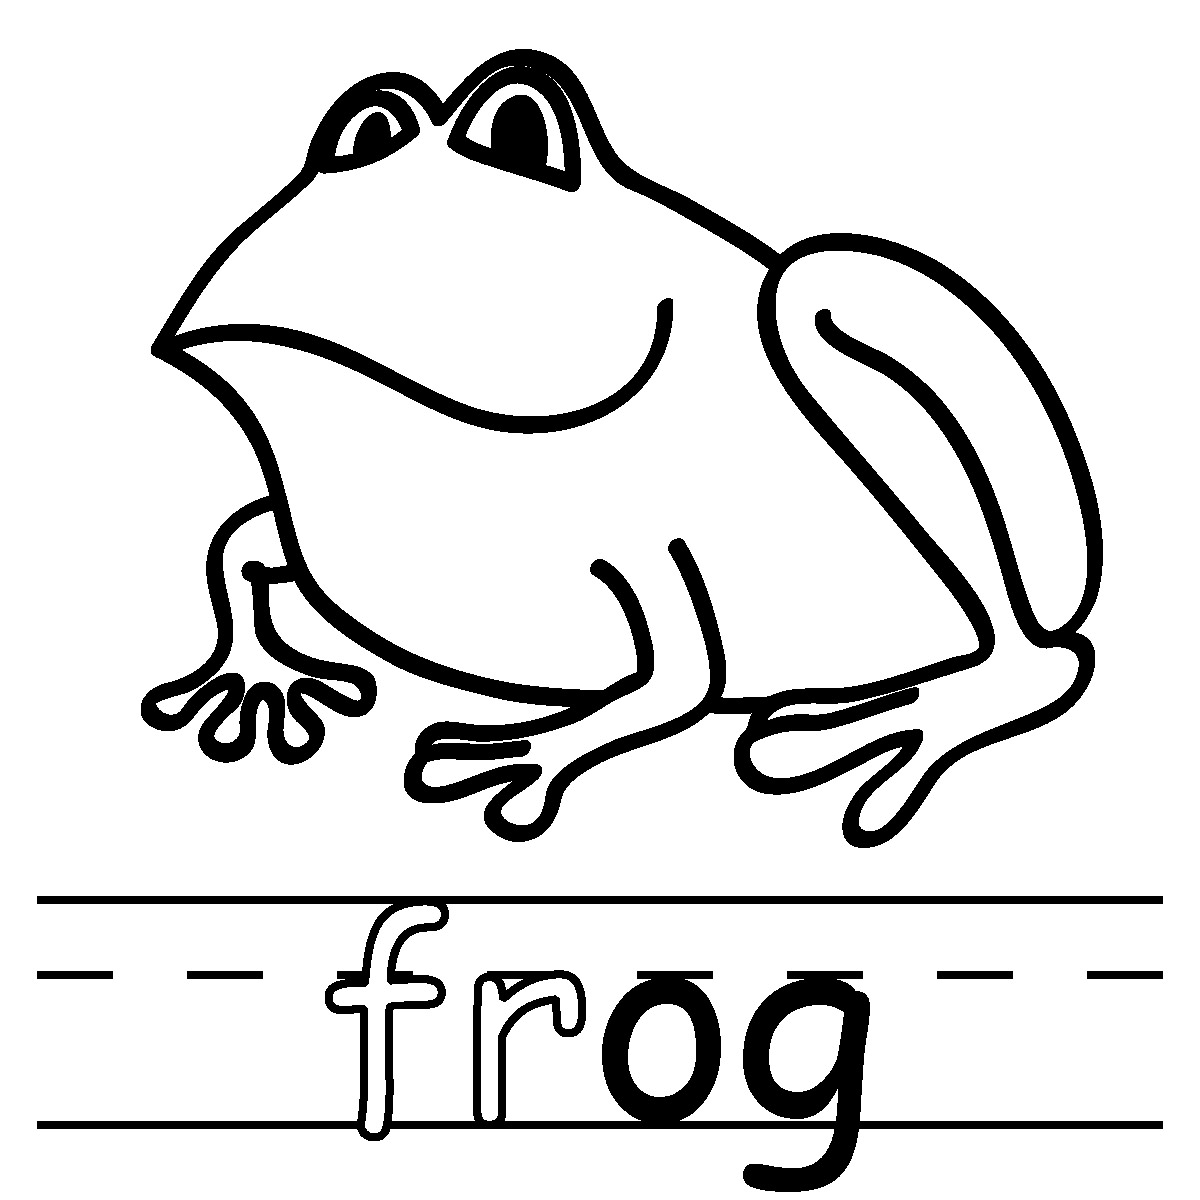 Tree frog clip art black and white free clipart